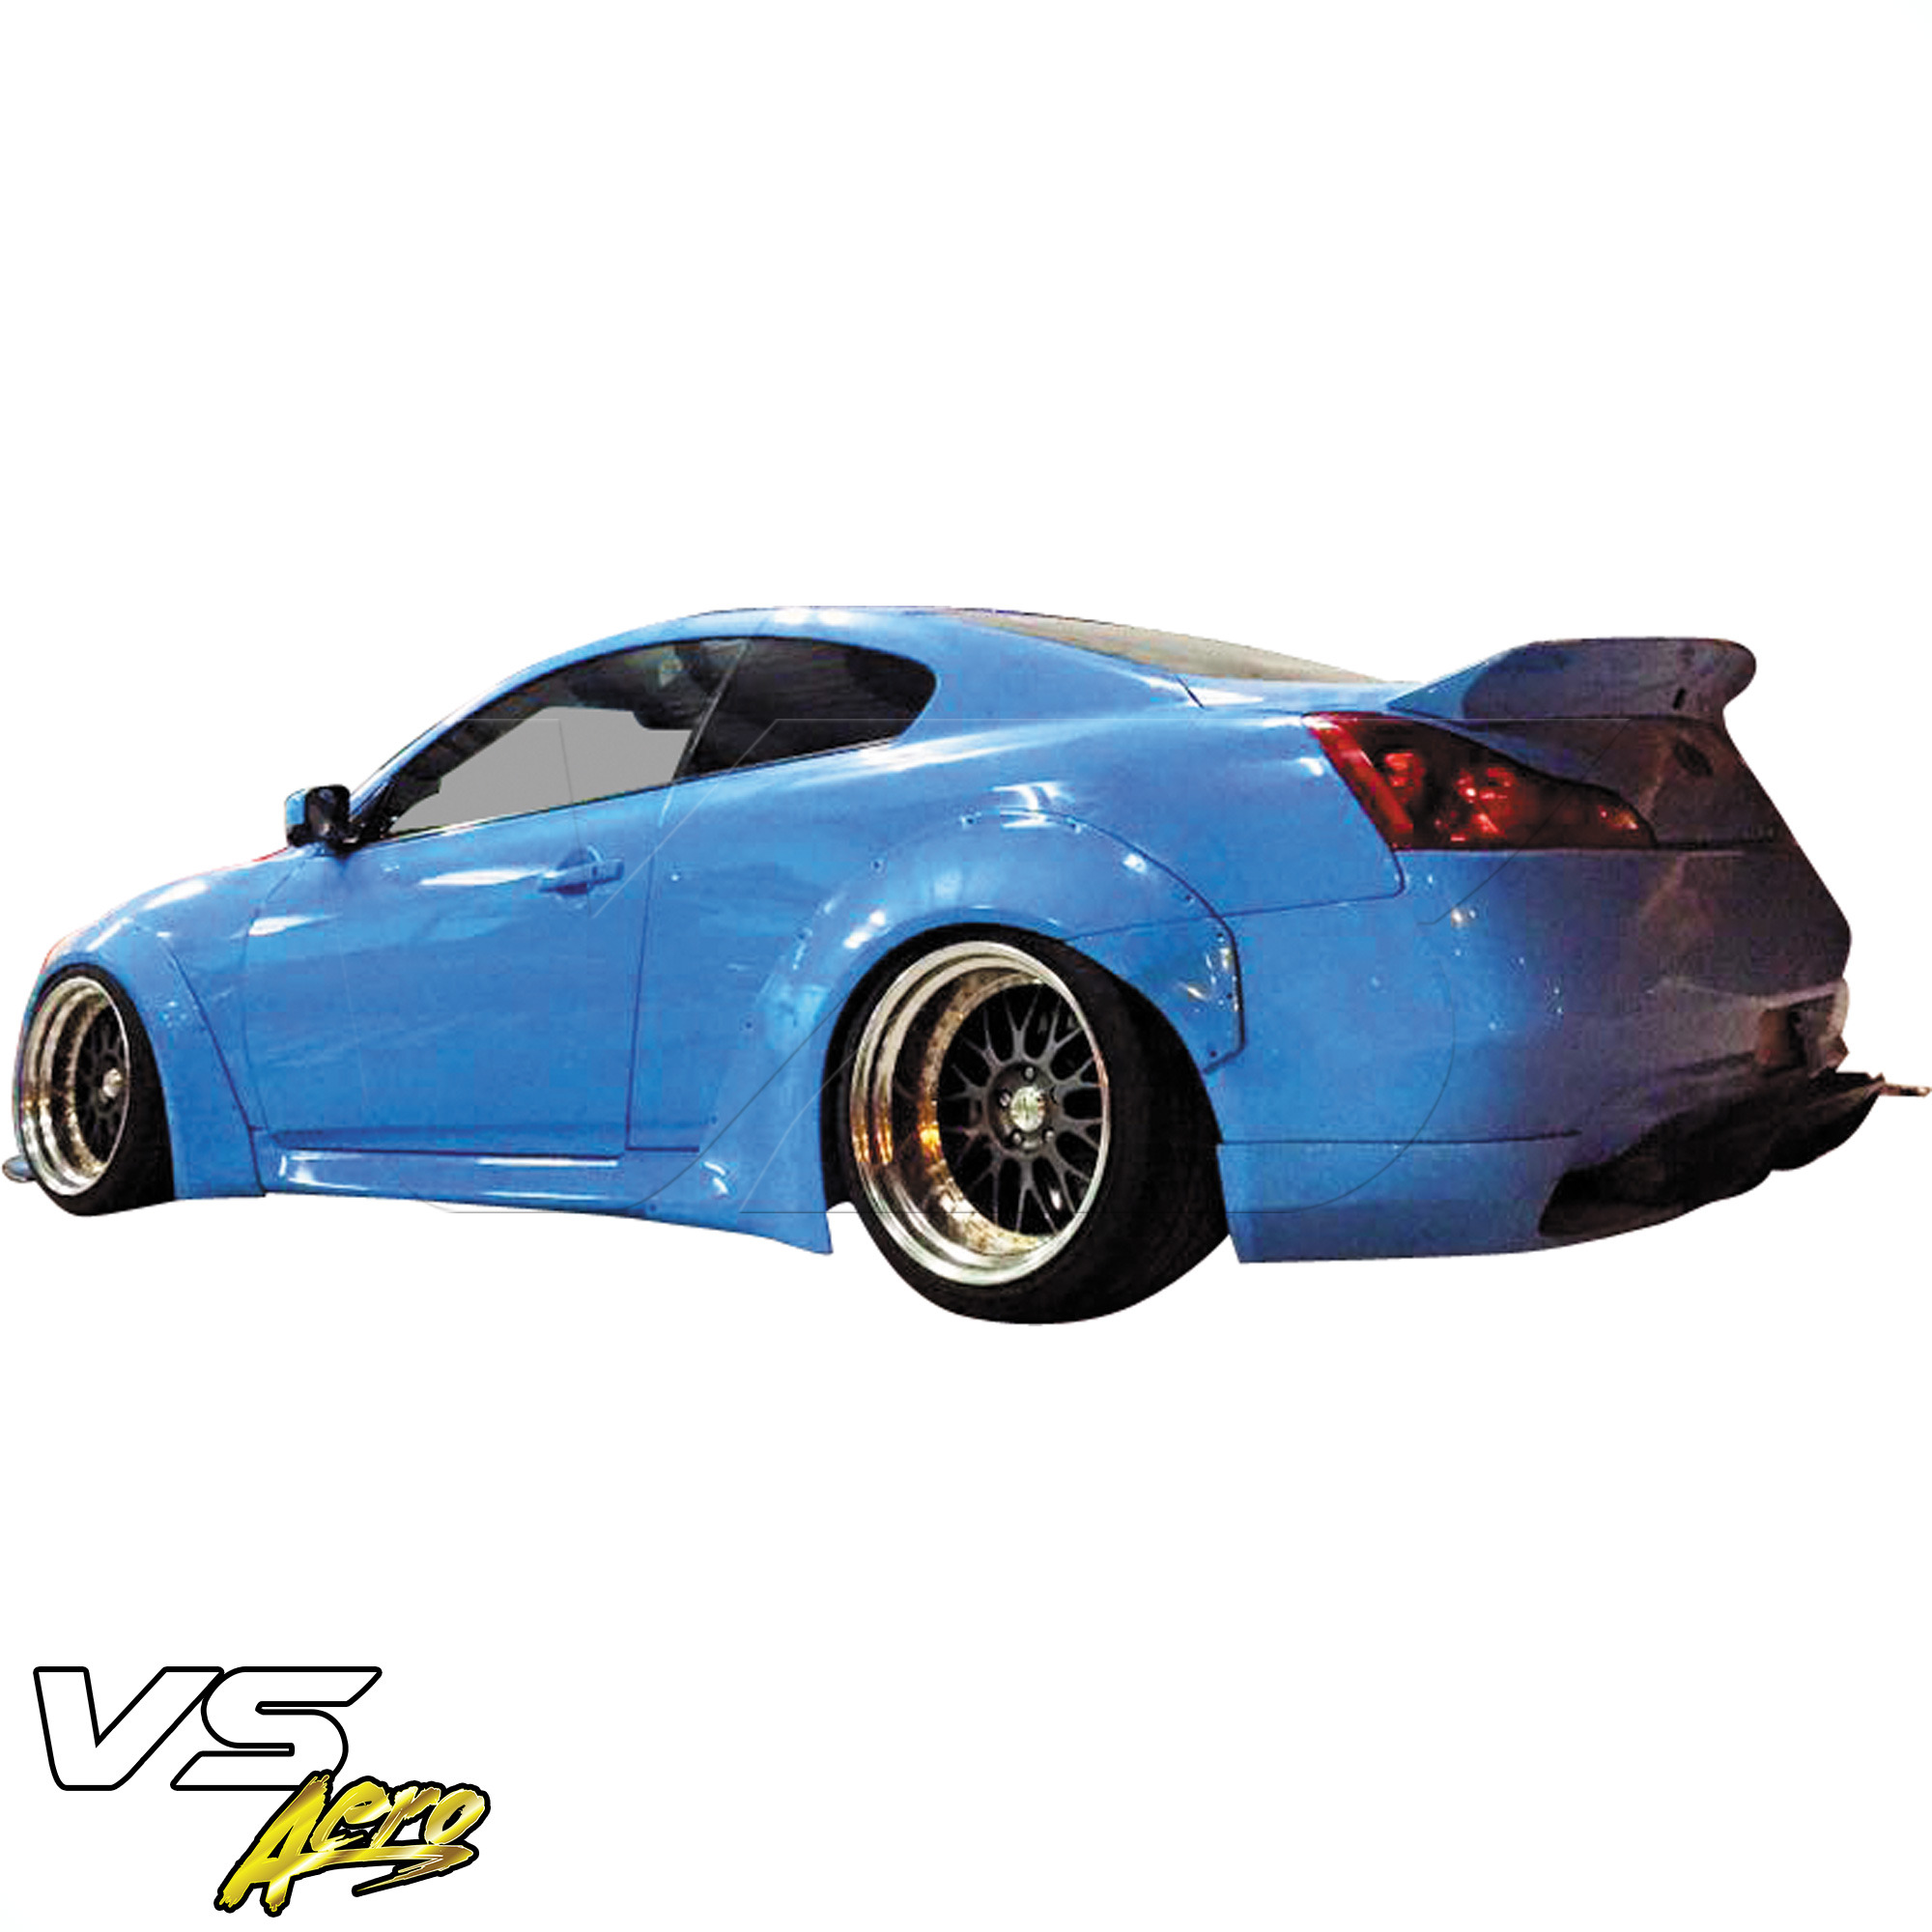 VSaero FRP LBPE Wide Body Fender Flares (rear) 4pc > Infiniti G37 Coupe 2008-2015 > 2dr Coupe - Image 25